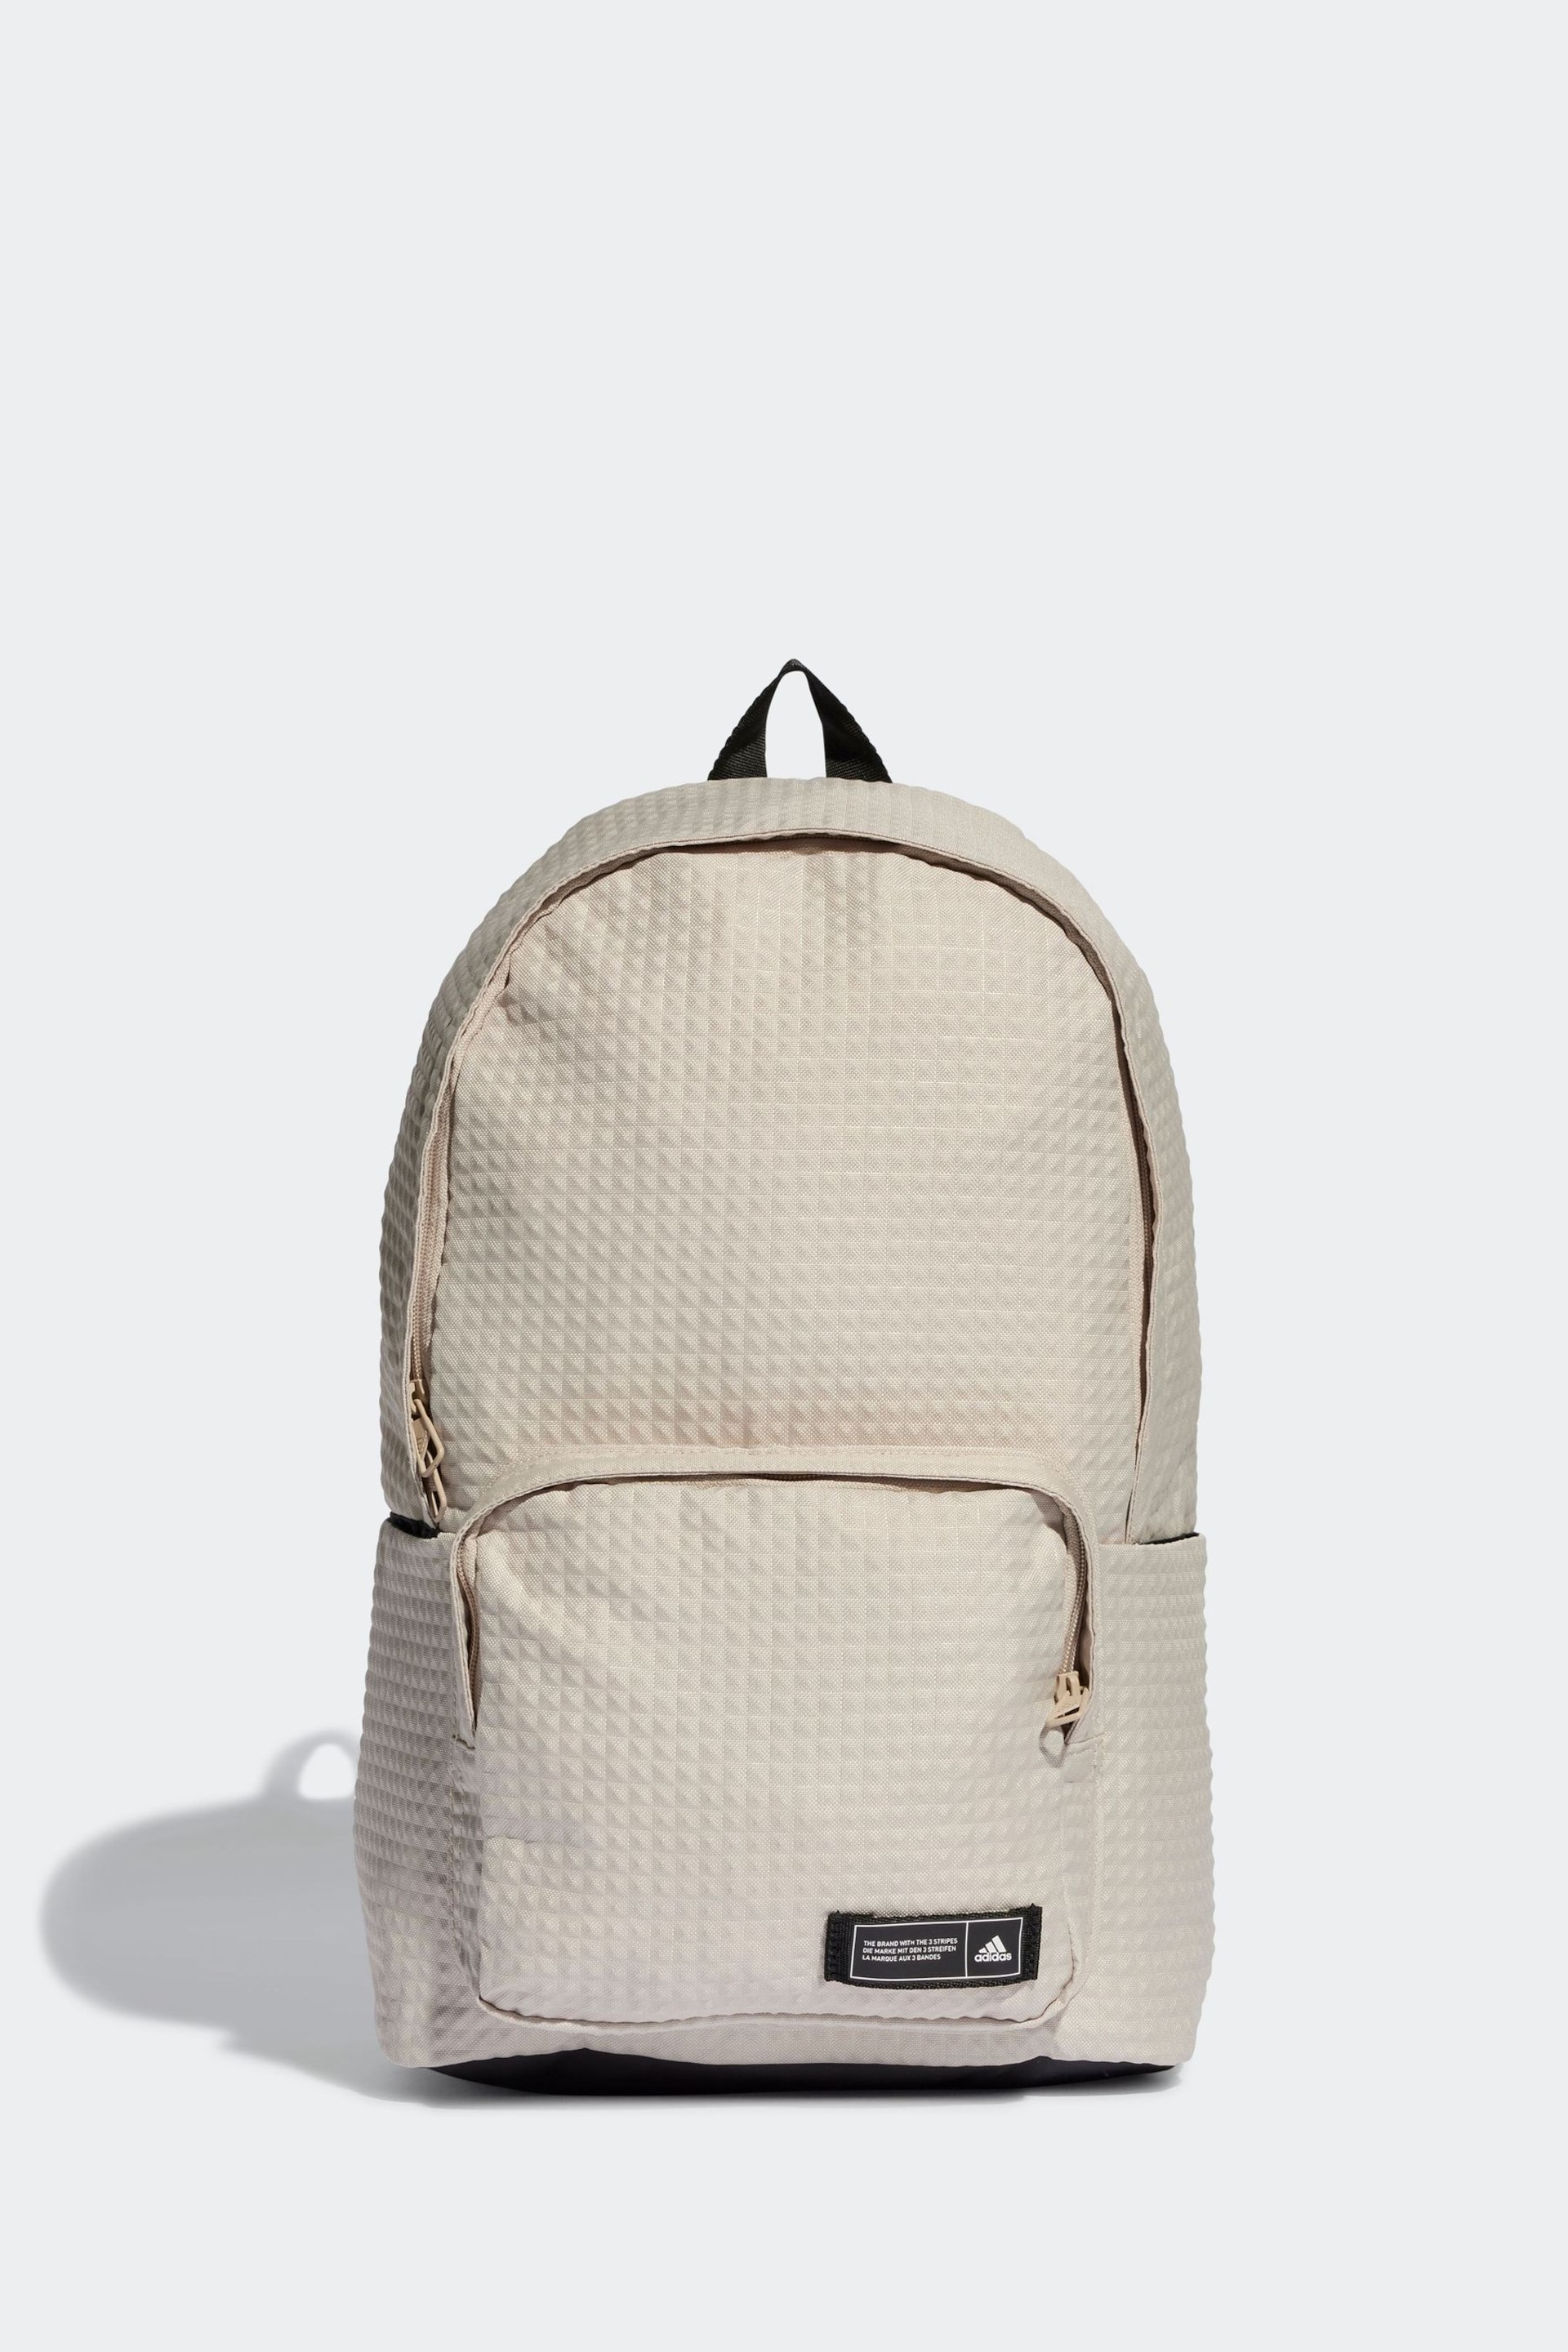 adidas Brown Adult Classic Foundation Backpack - Image 1 of 3